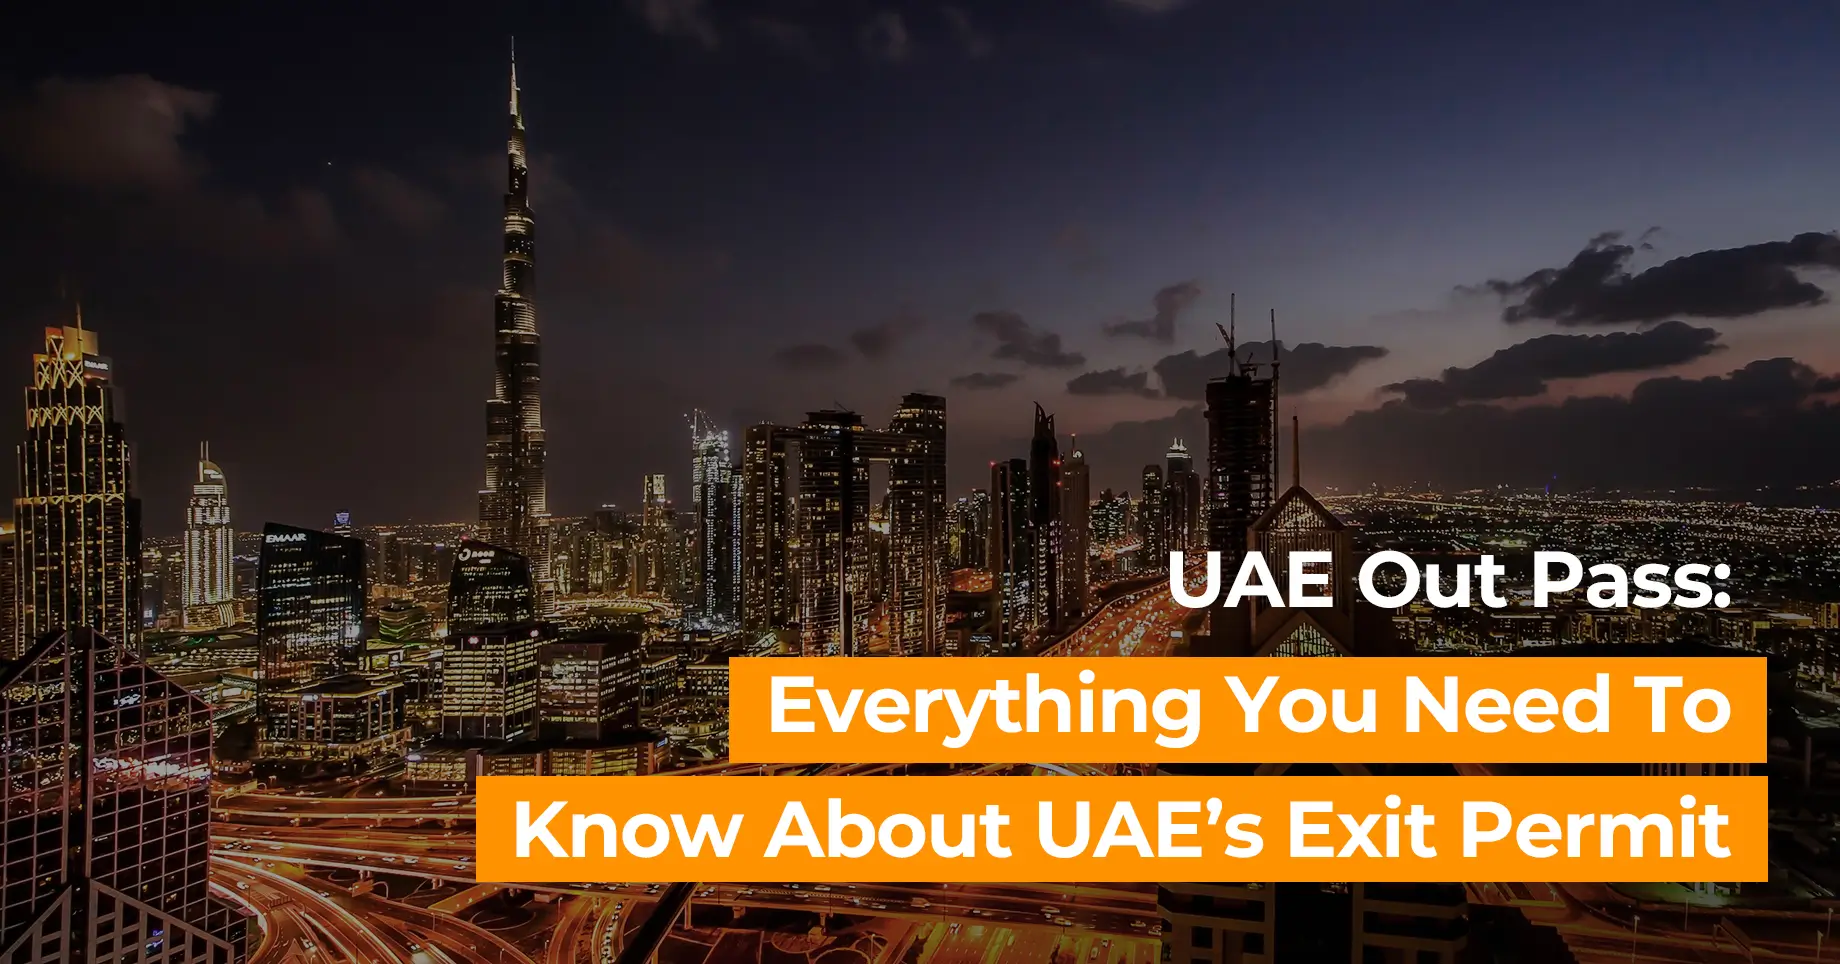 UAE Out Pass: Everything You Need To Know About UAE’s Exit Permit